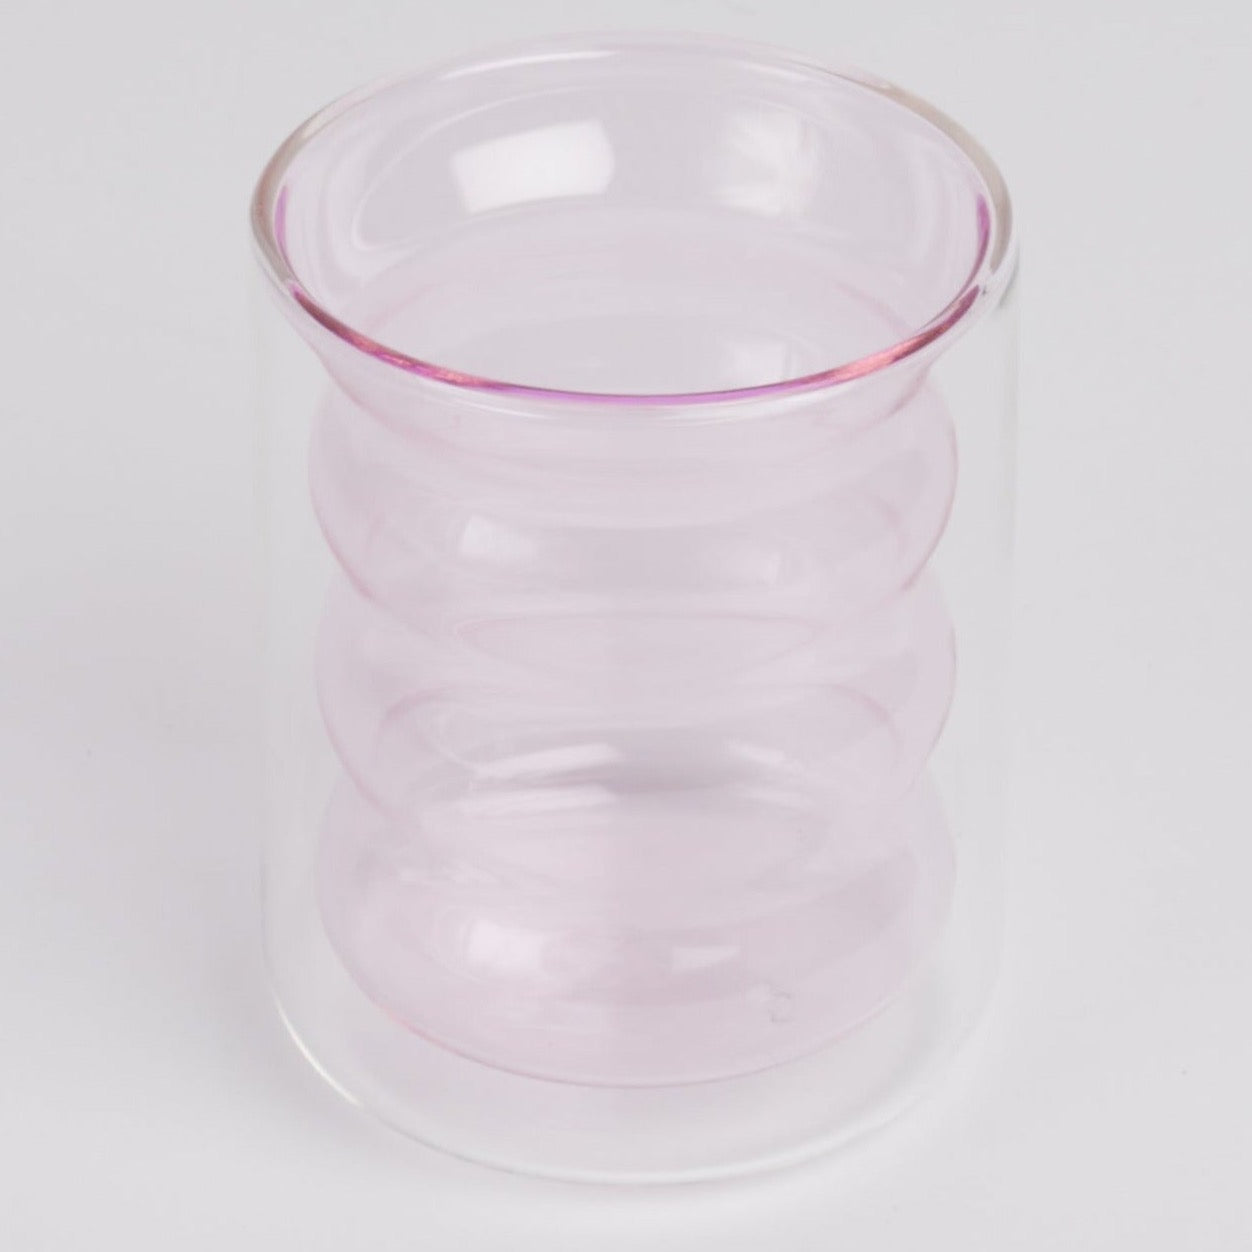 A double-walled light pink rippled glass standing upright shot against a white background.